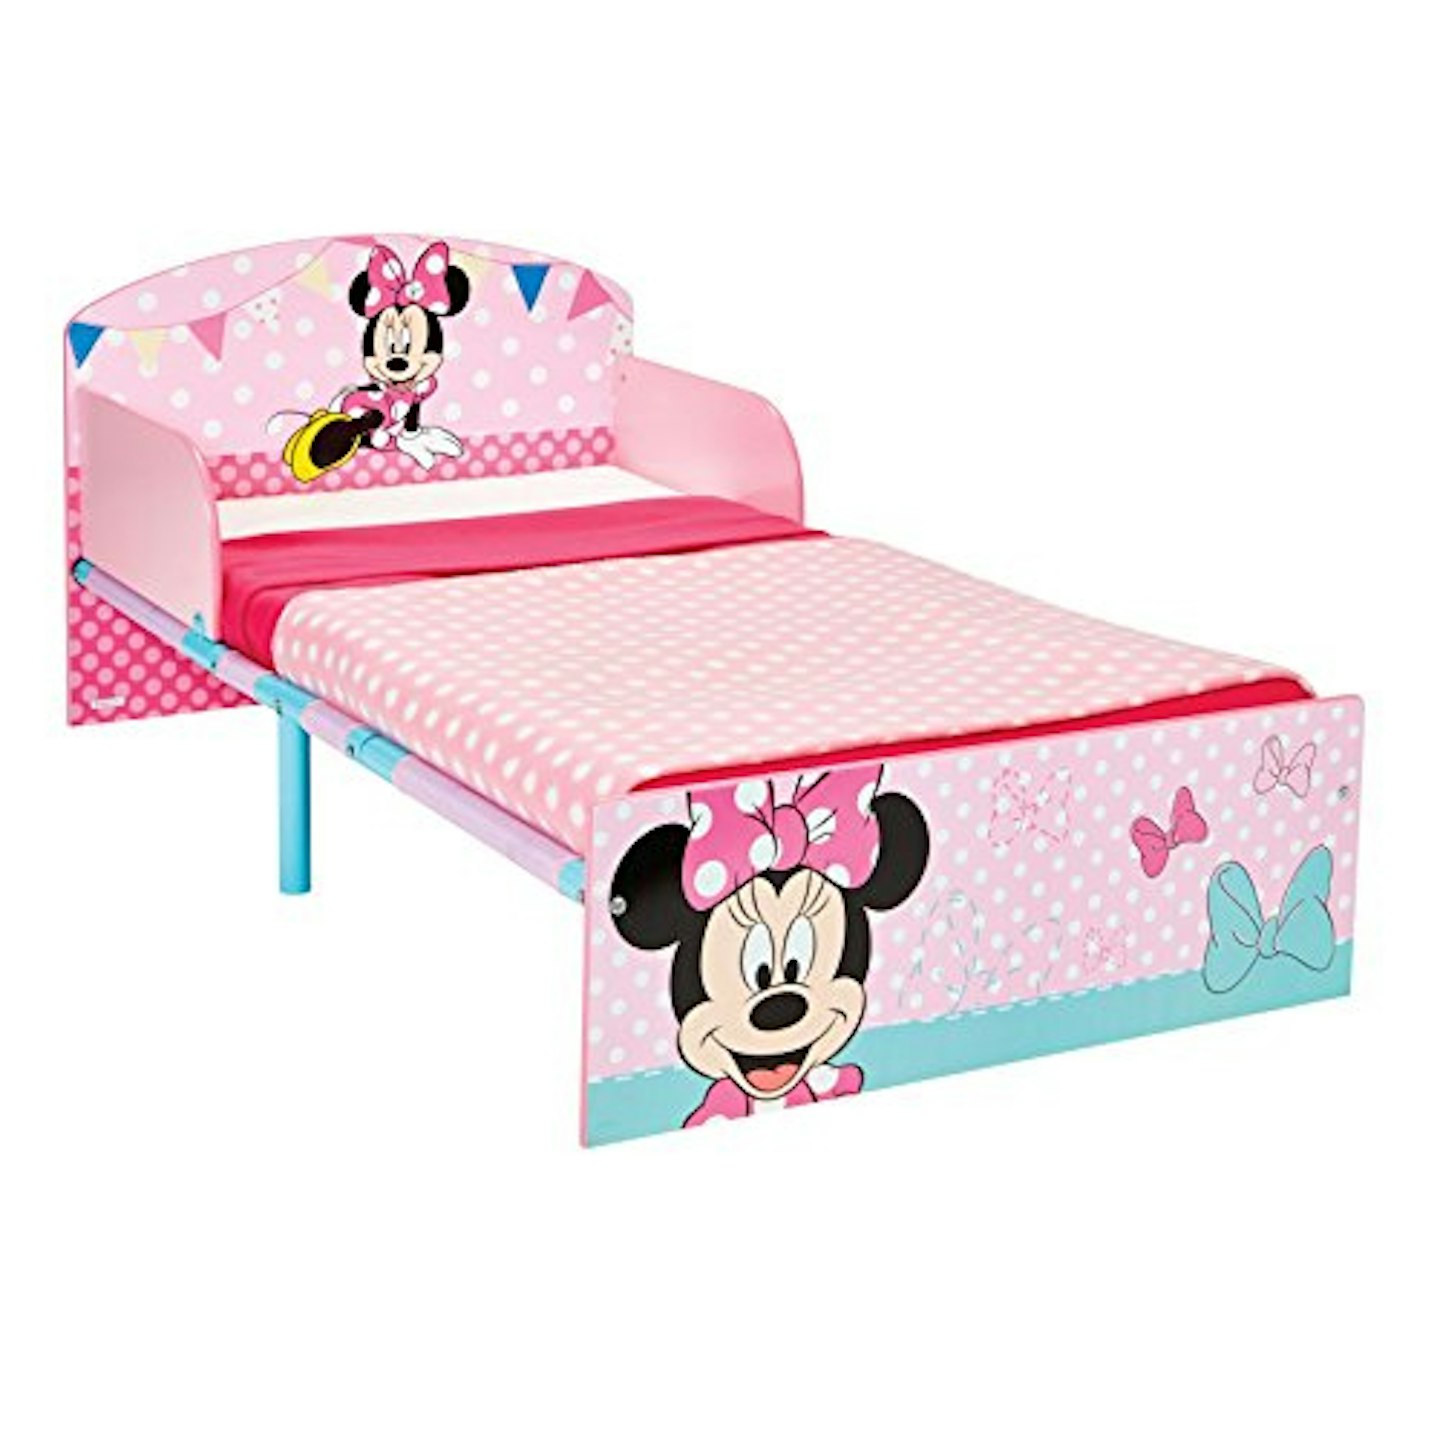 Disney Minnie Mouse Toddler Bed 